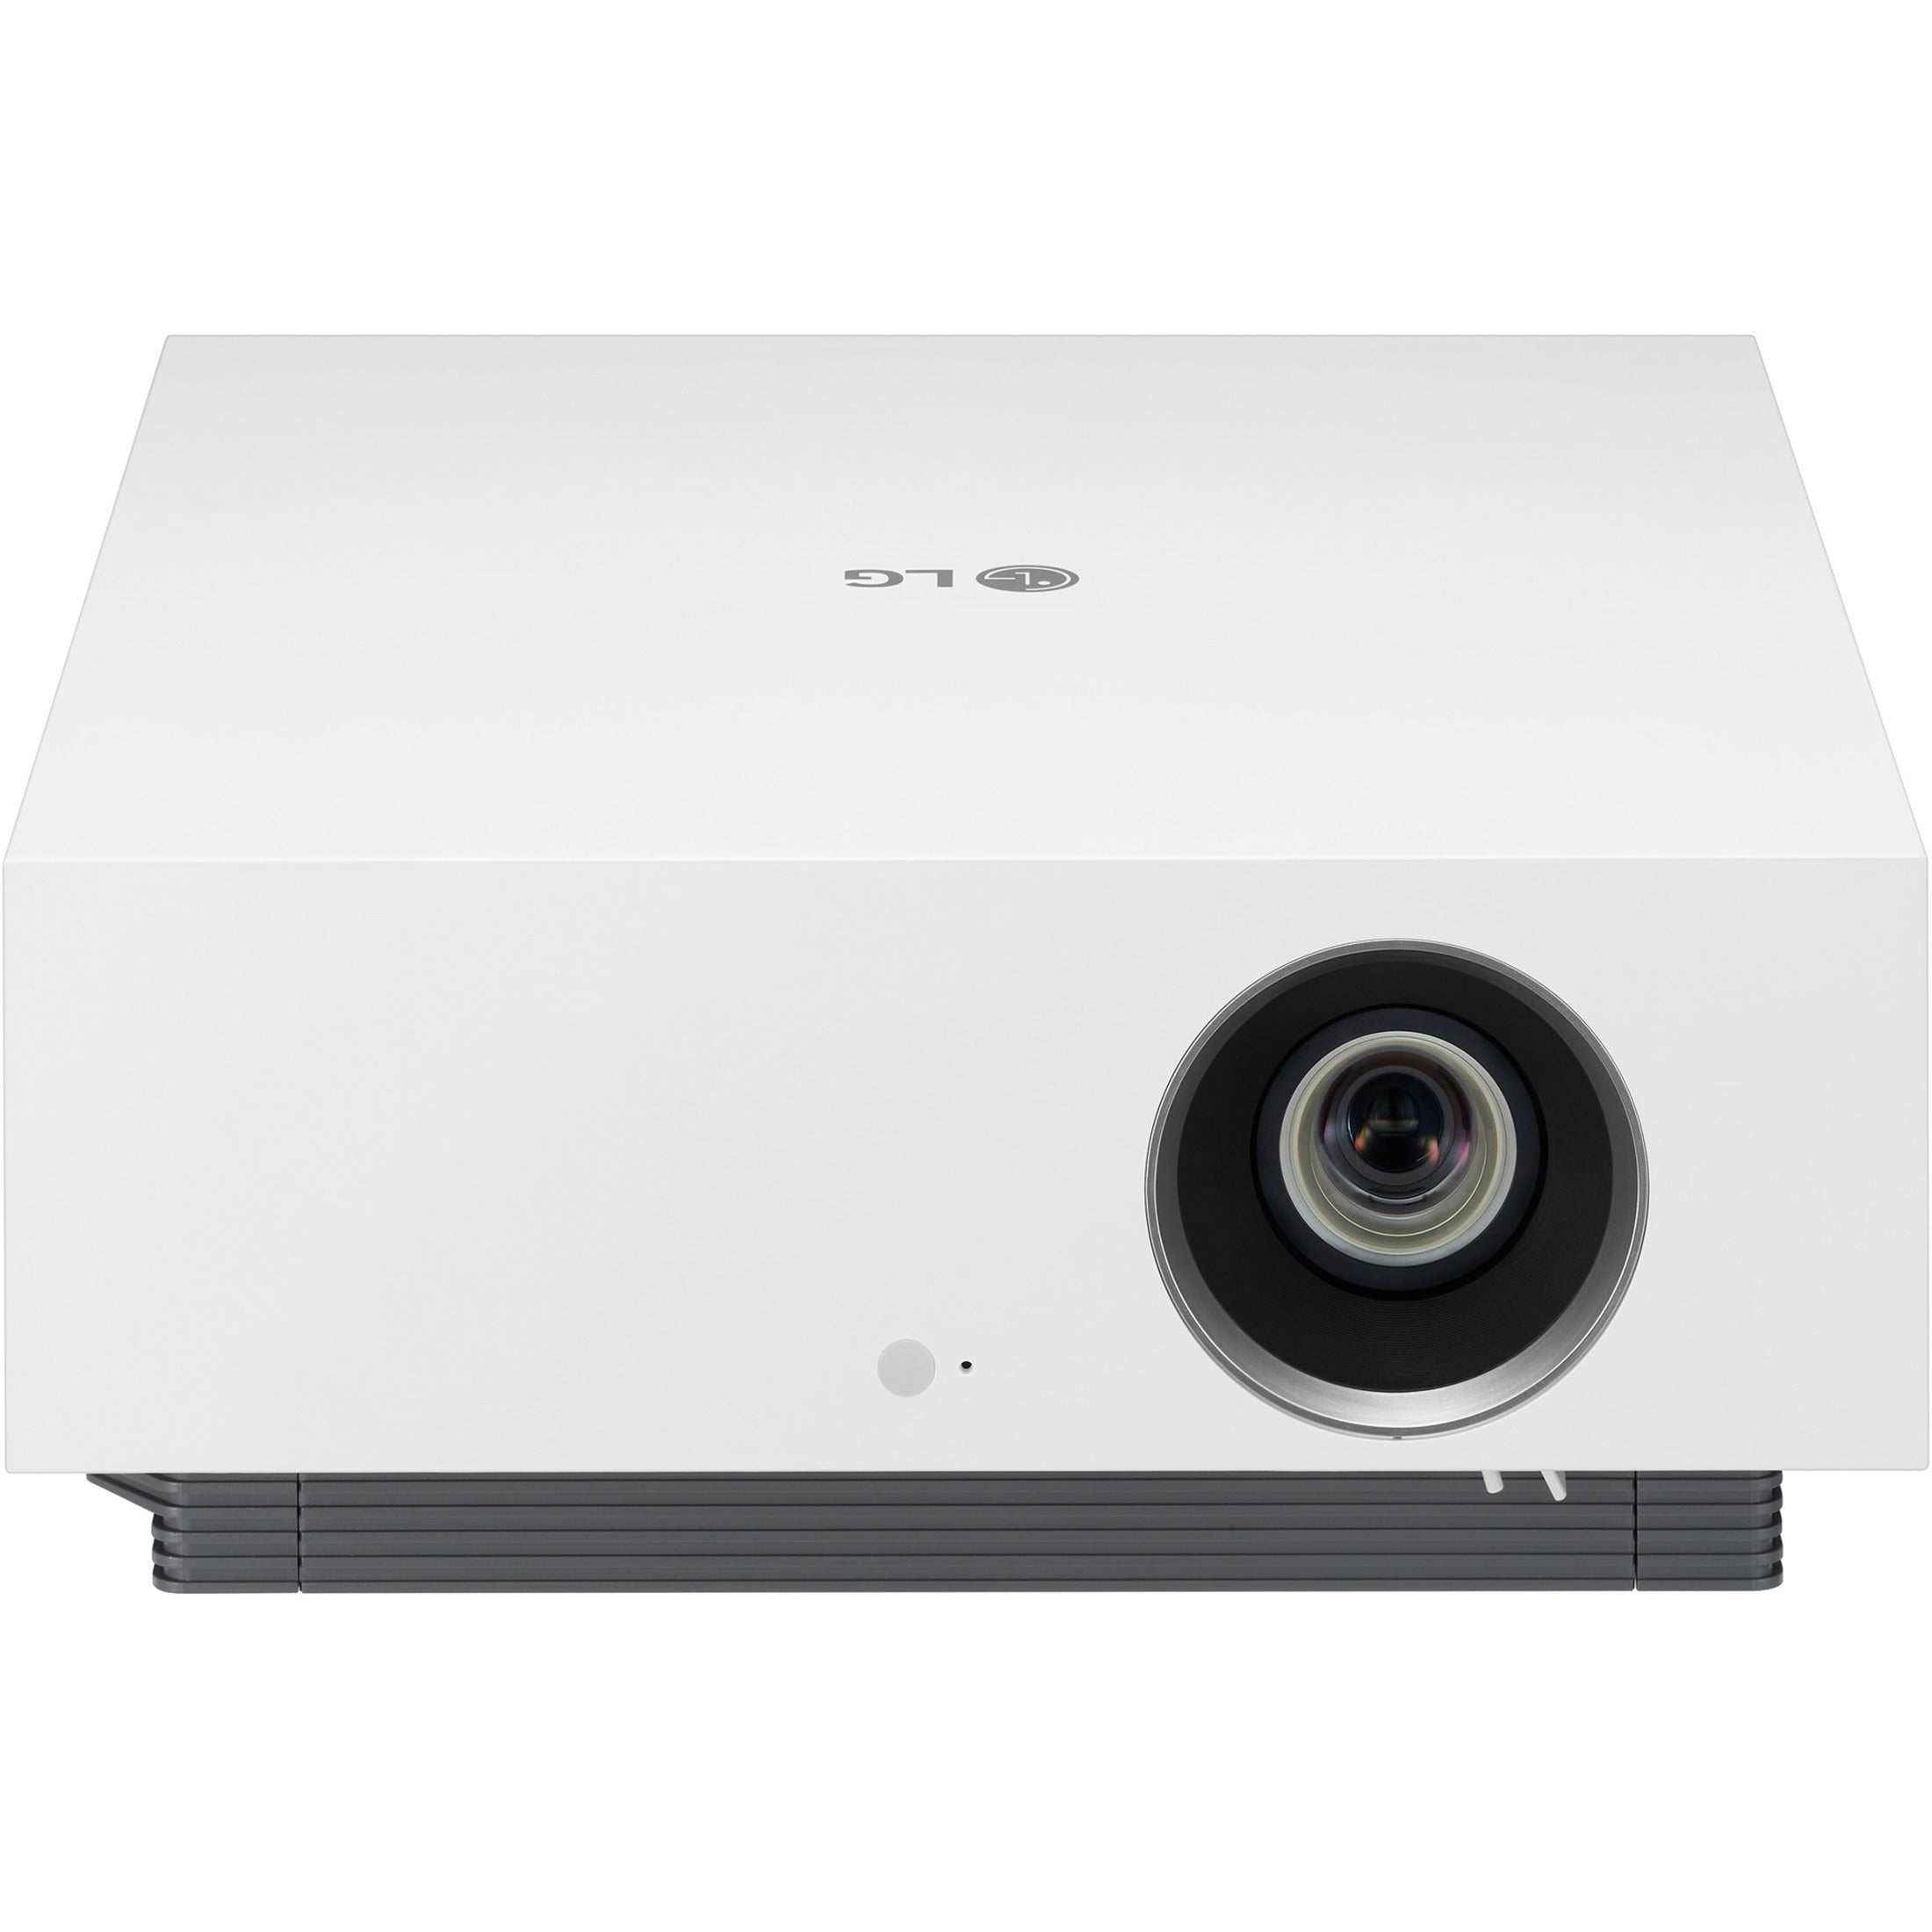 LG HU810PW CineBeam 4K UHD Laser Smart Home Theater Projector, 16:9, 2700 lm